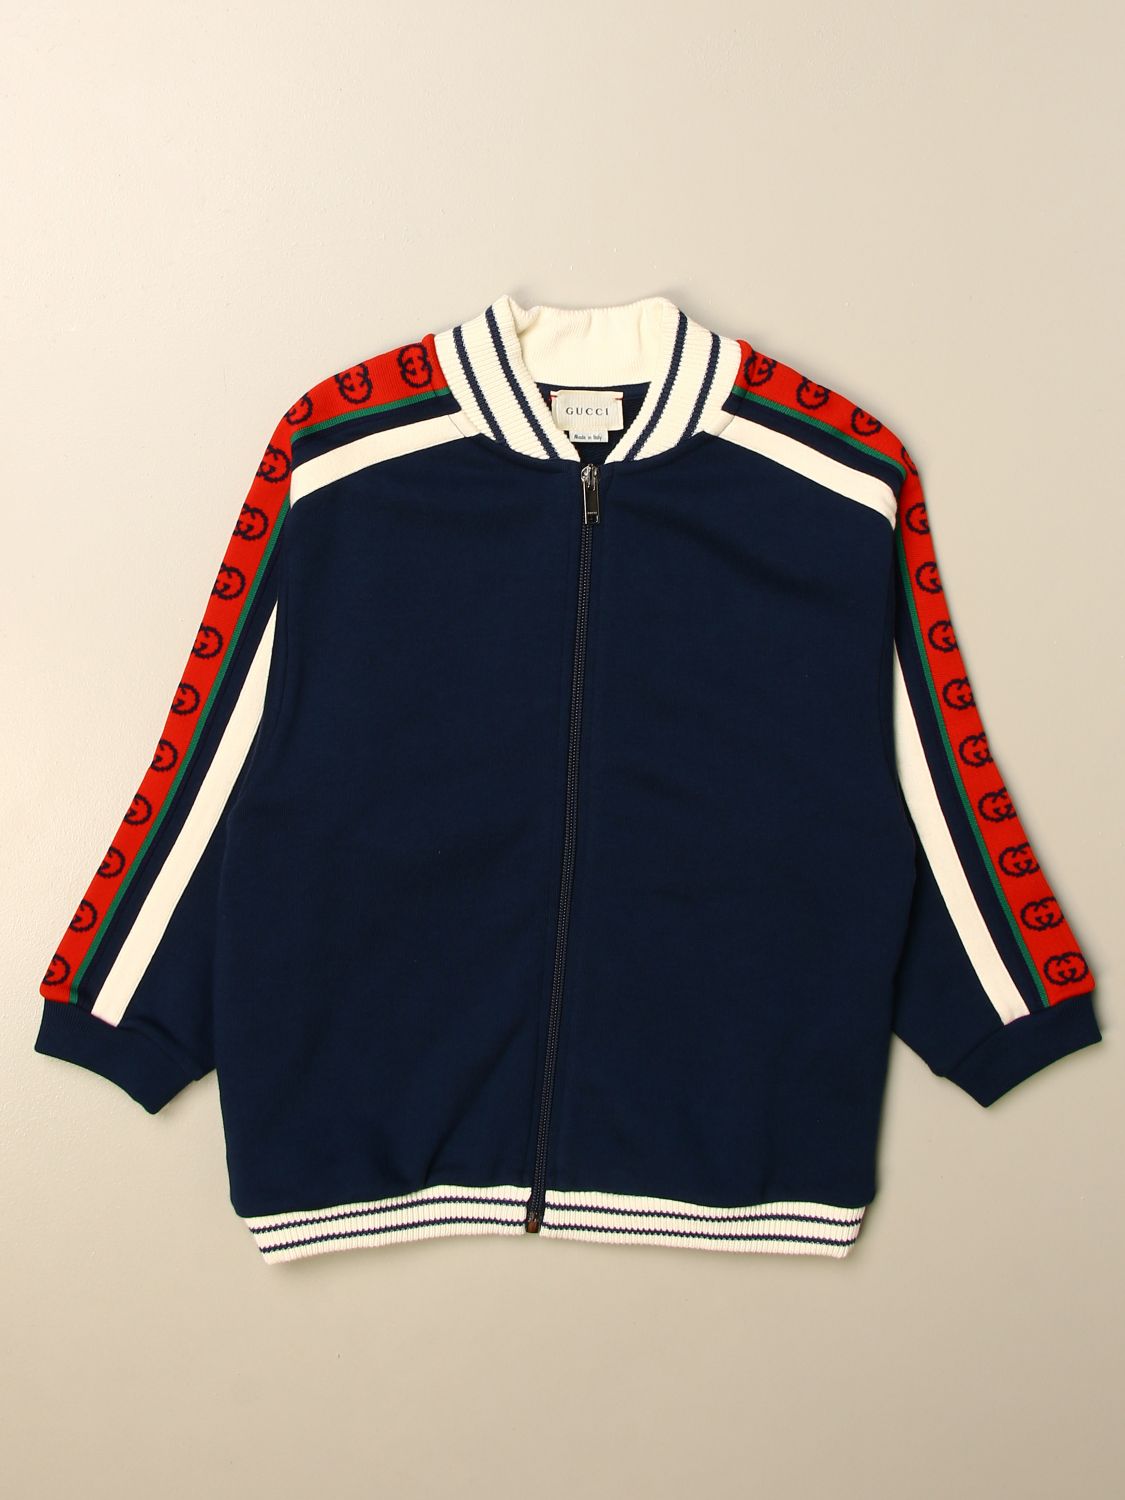 GUCCI: bomber jacket with zip and GG bands - Blue | Gucci sweater ...